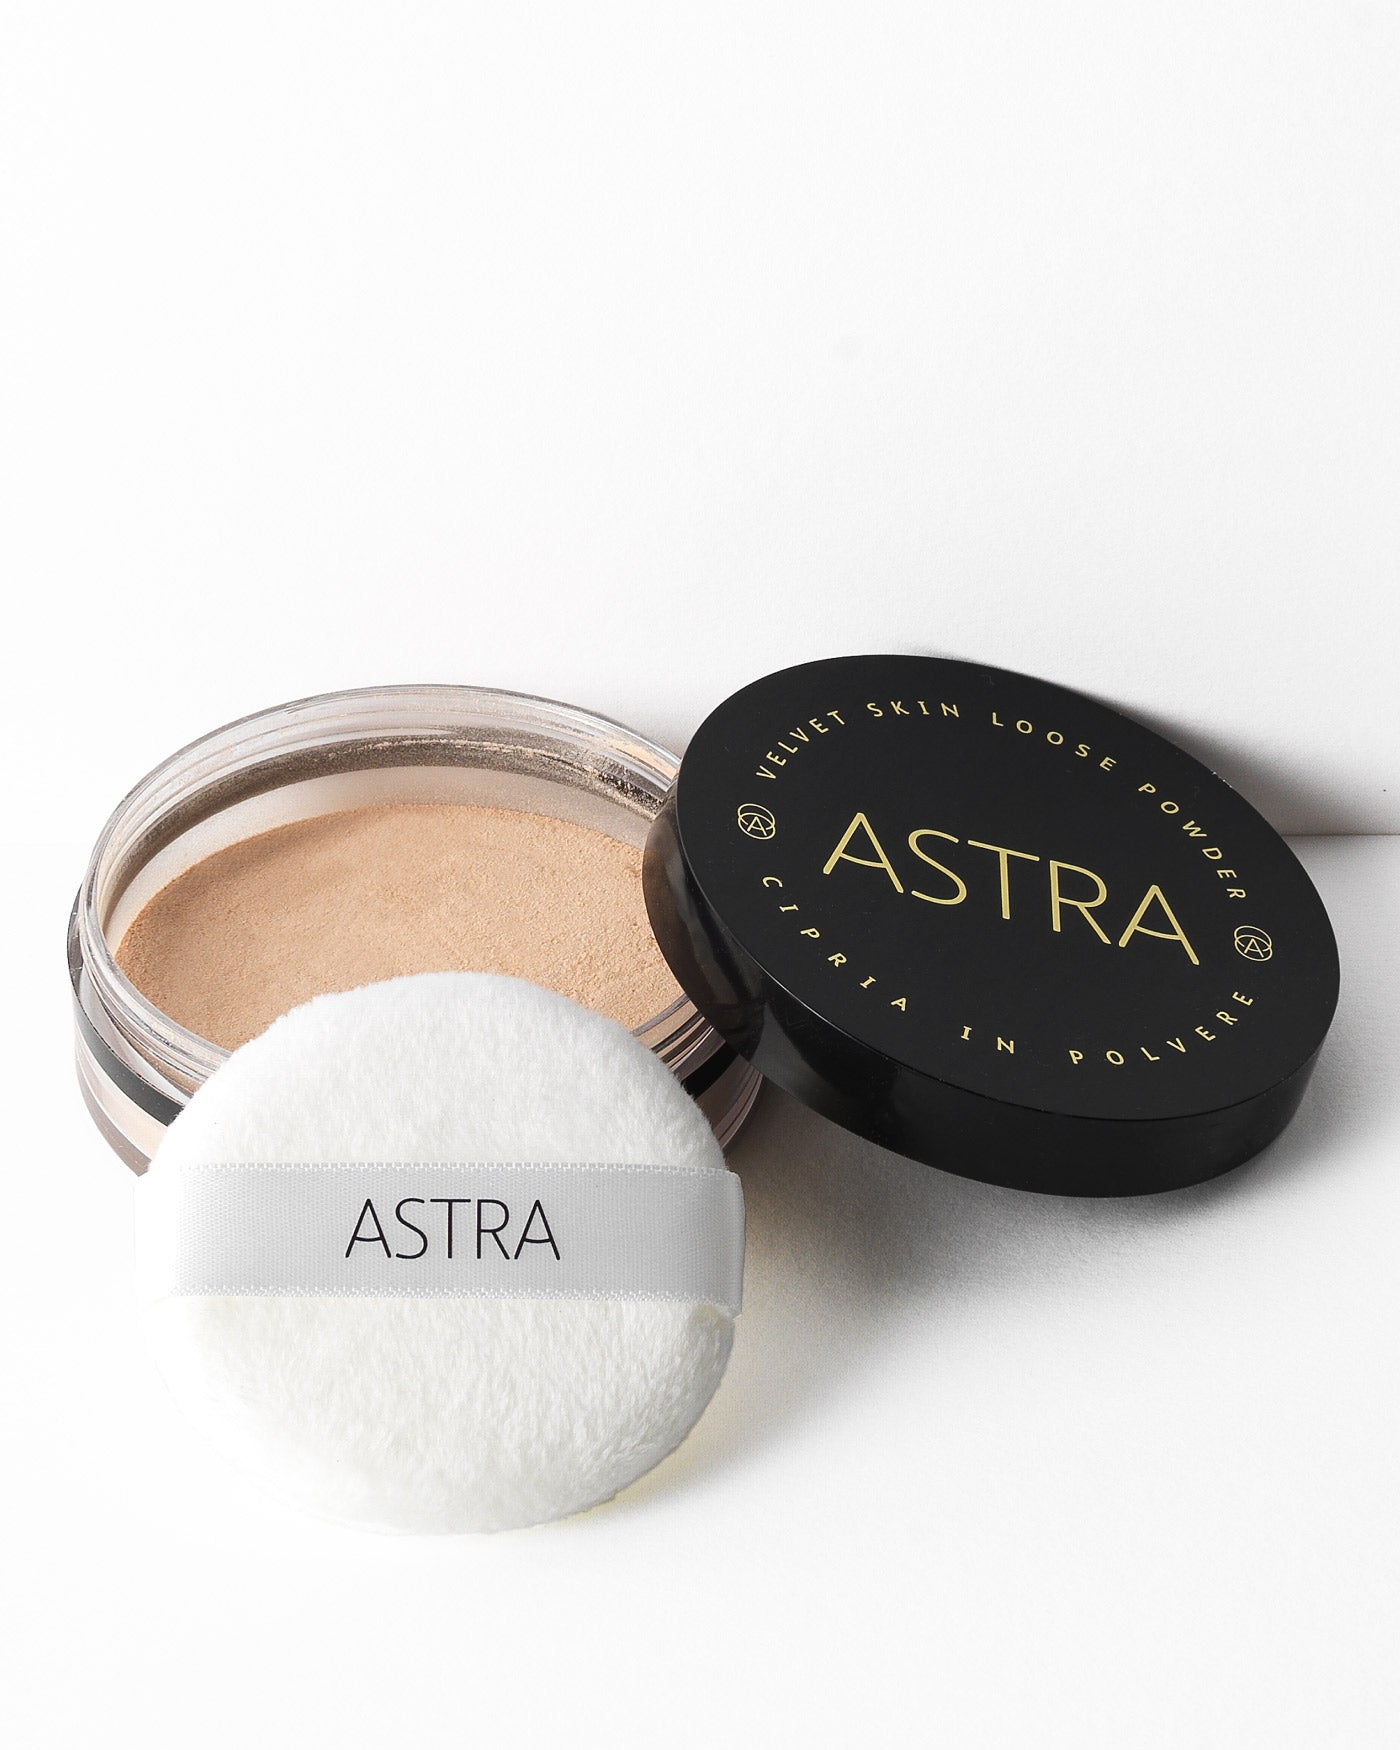 VELVET SKIN LOOSE POWDER - All Products - Astra Make-Up